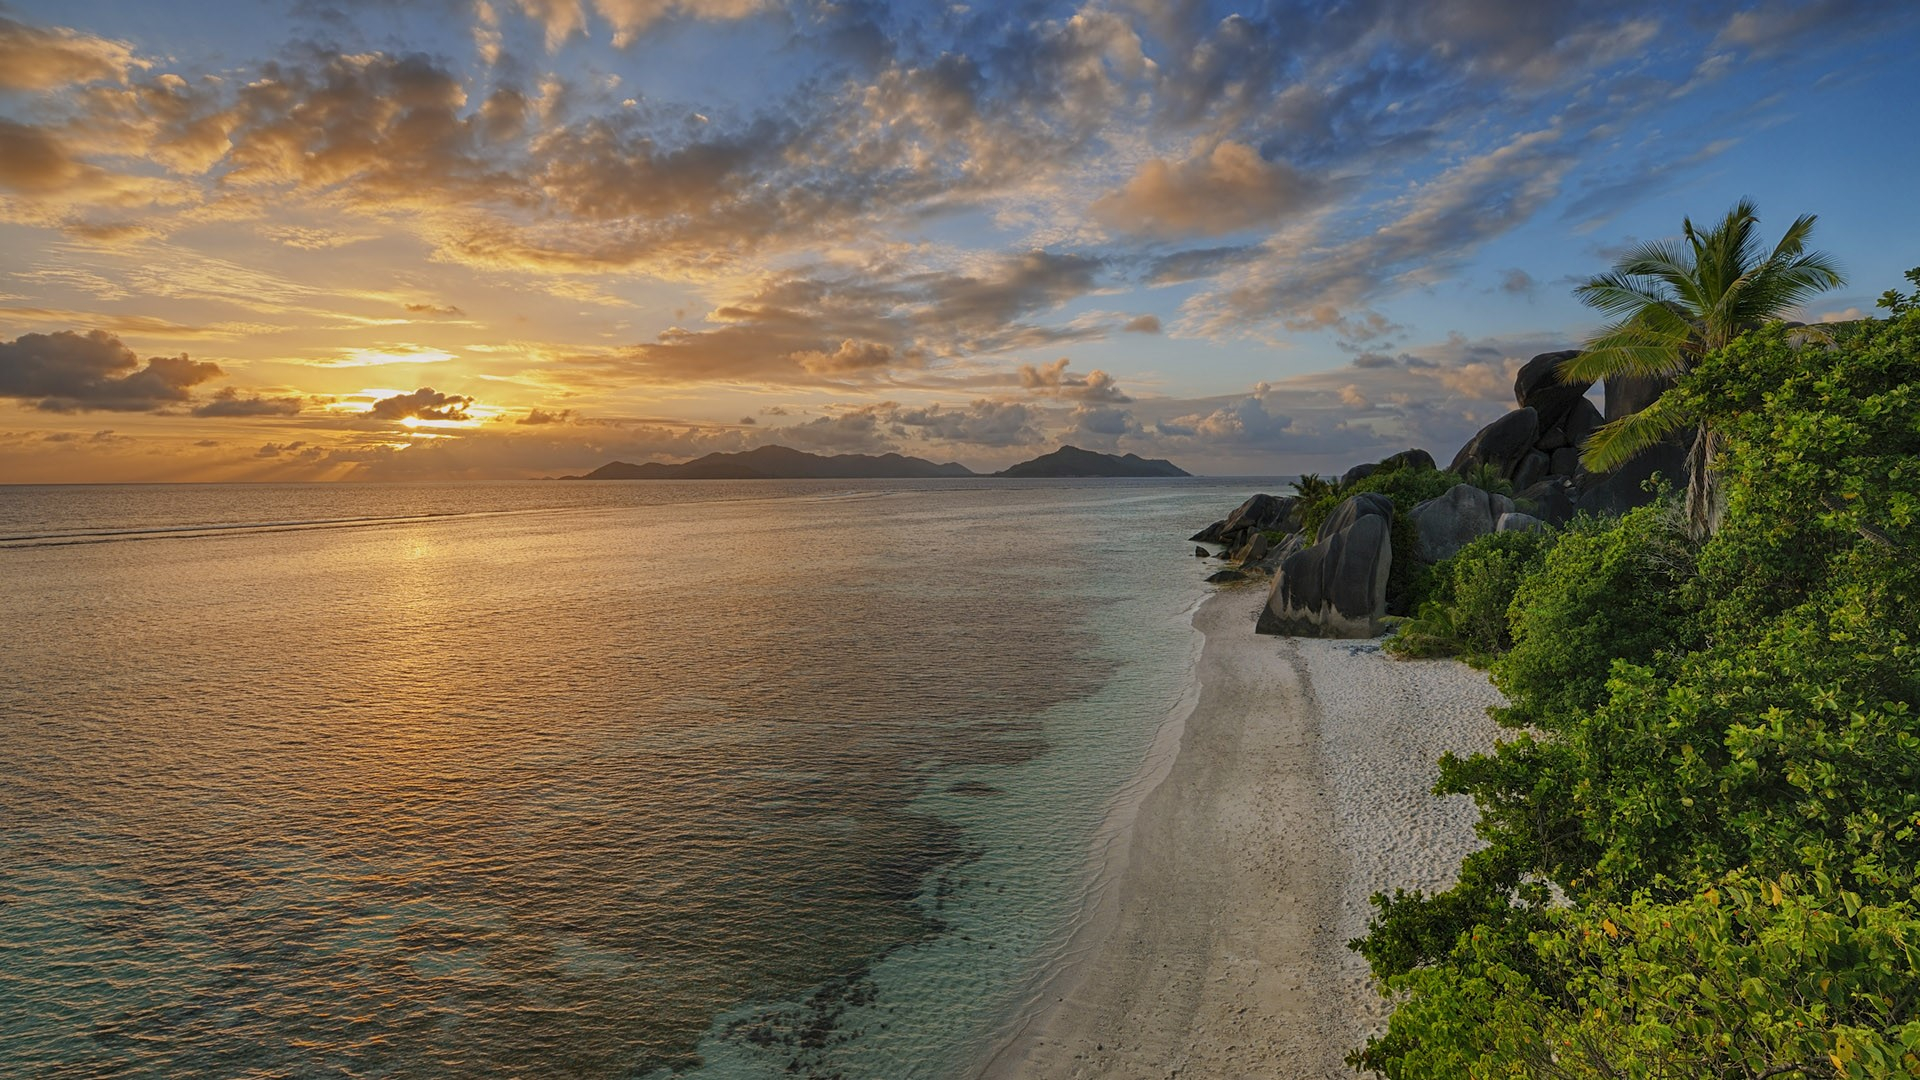 1920x1080 View to Anse Source d' Argent with sculpted rocks and palm trees at sunset, La Digue, Seychelles | Windows 10 Spotlight Images